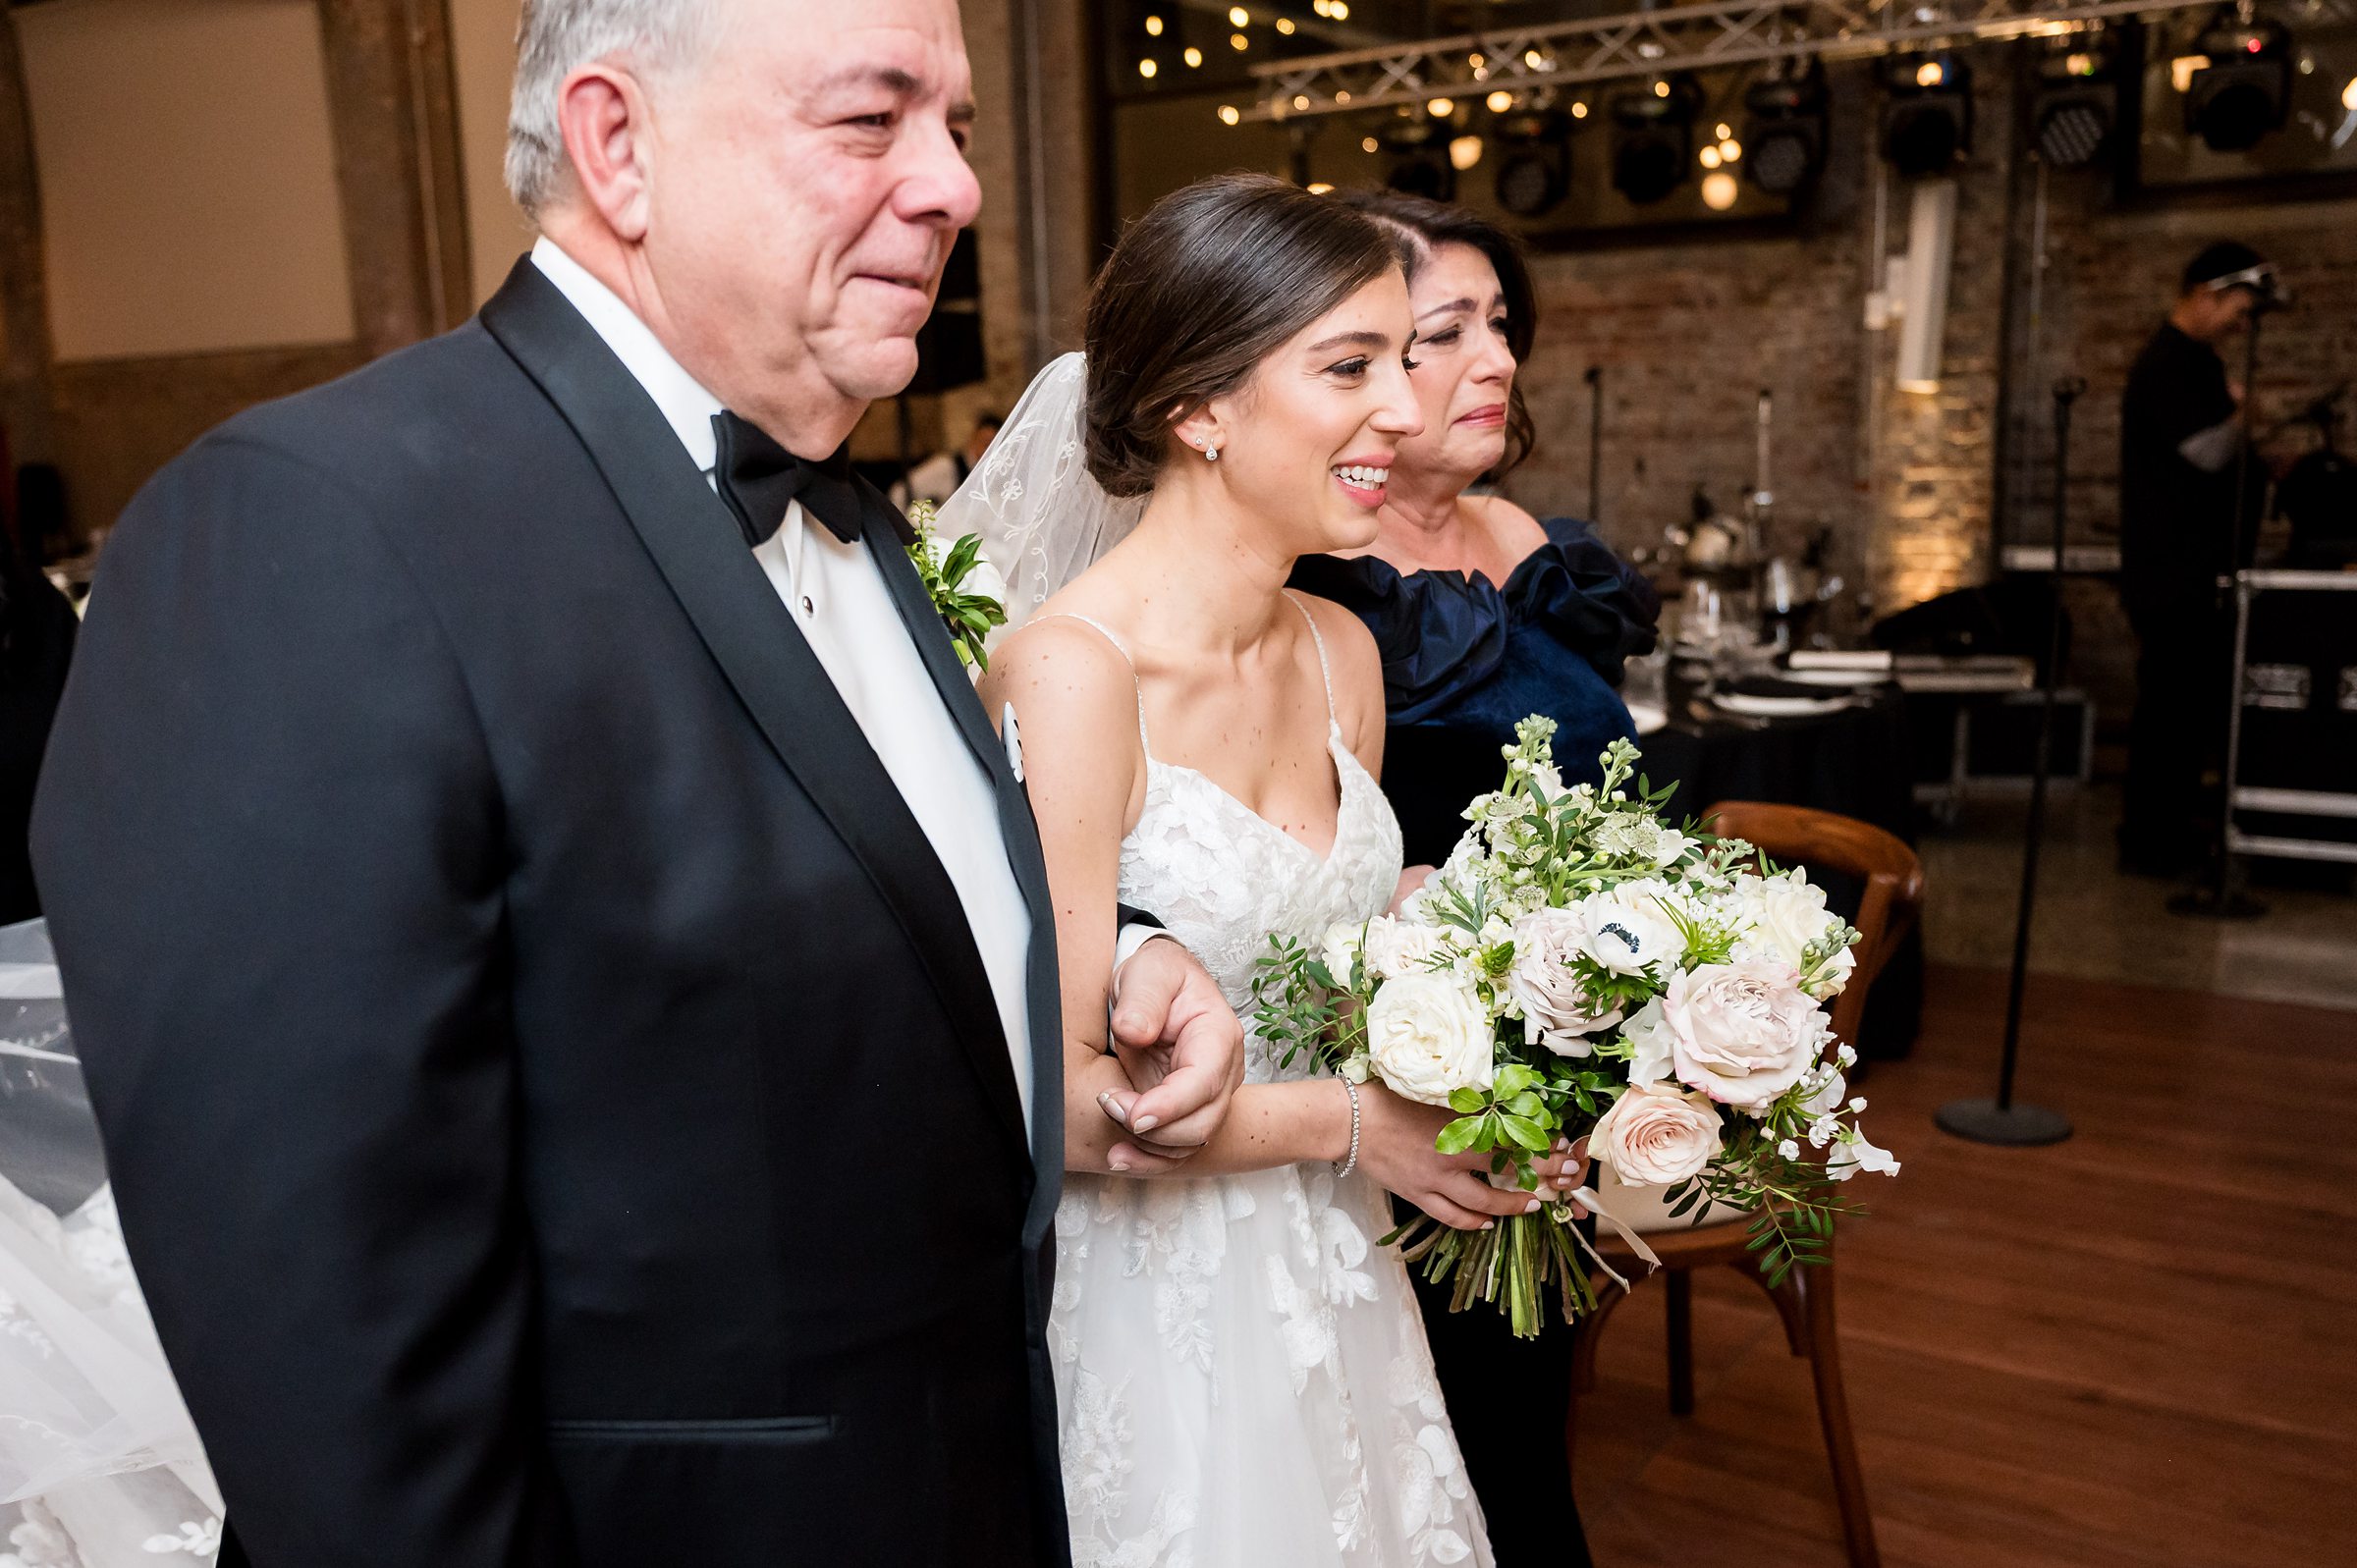 At a Lilah wedding event, a bride walks down the aisle with her father.